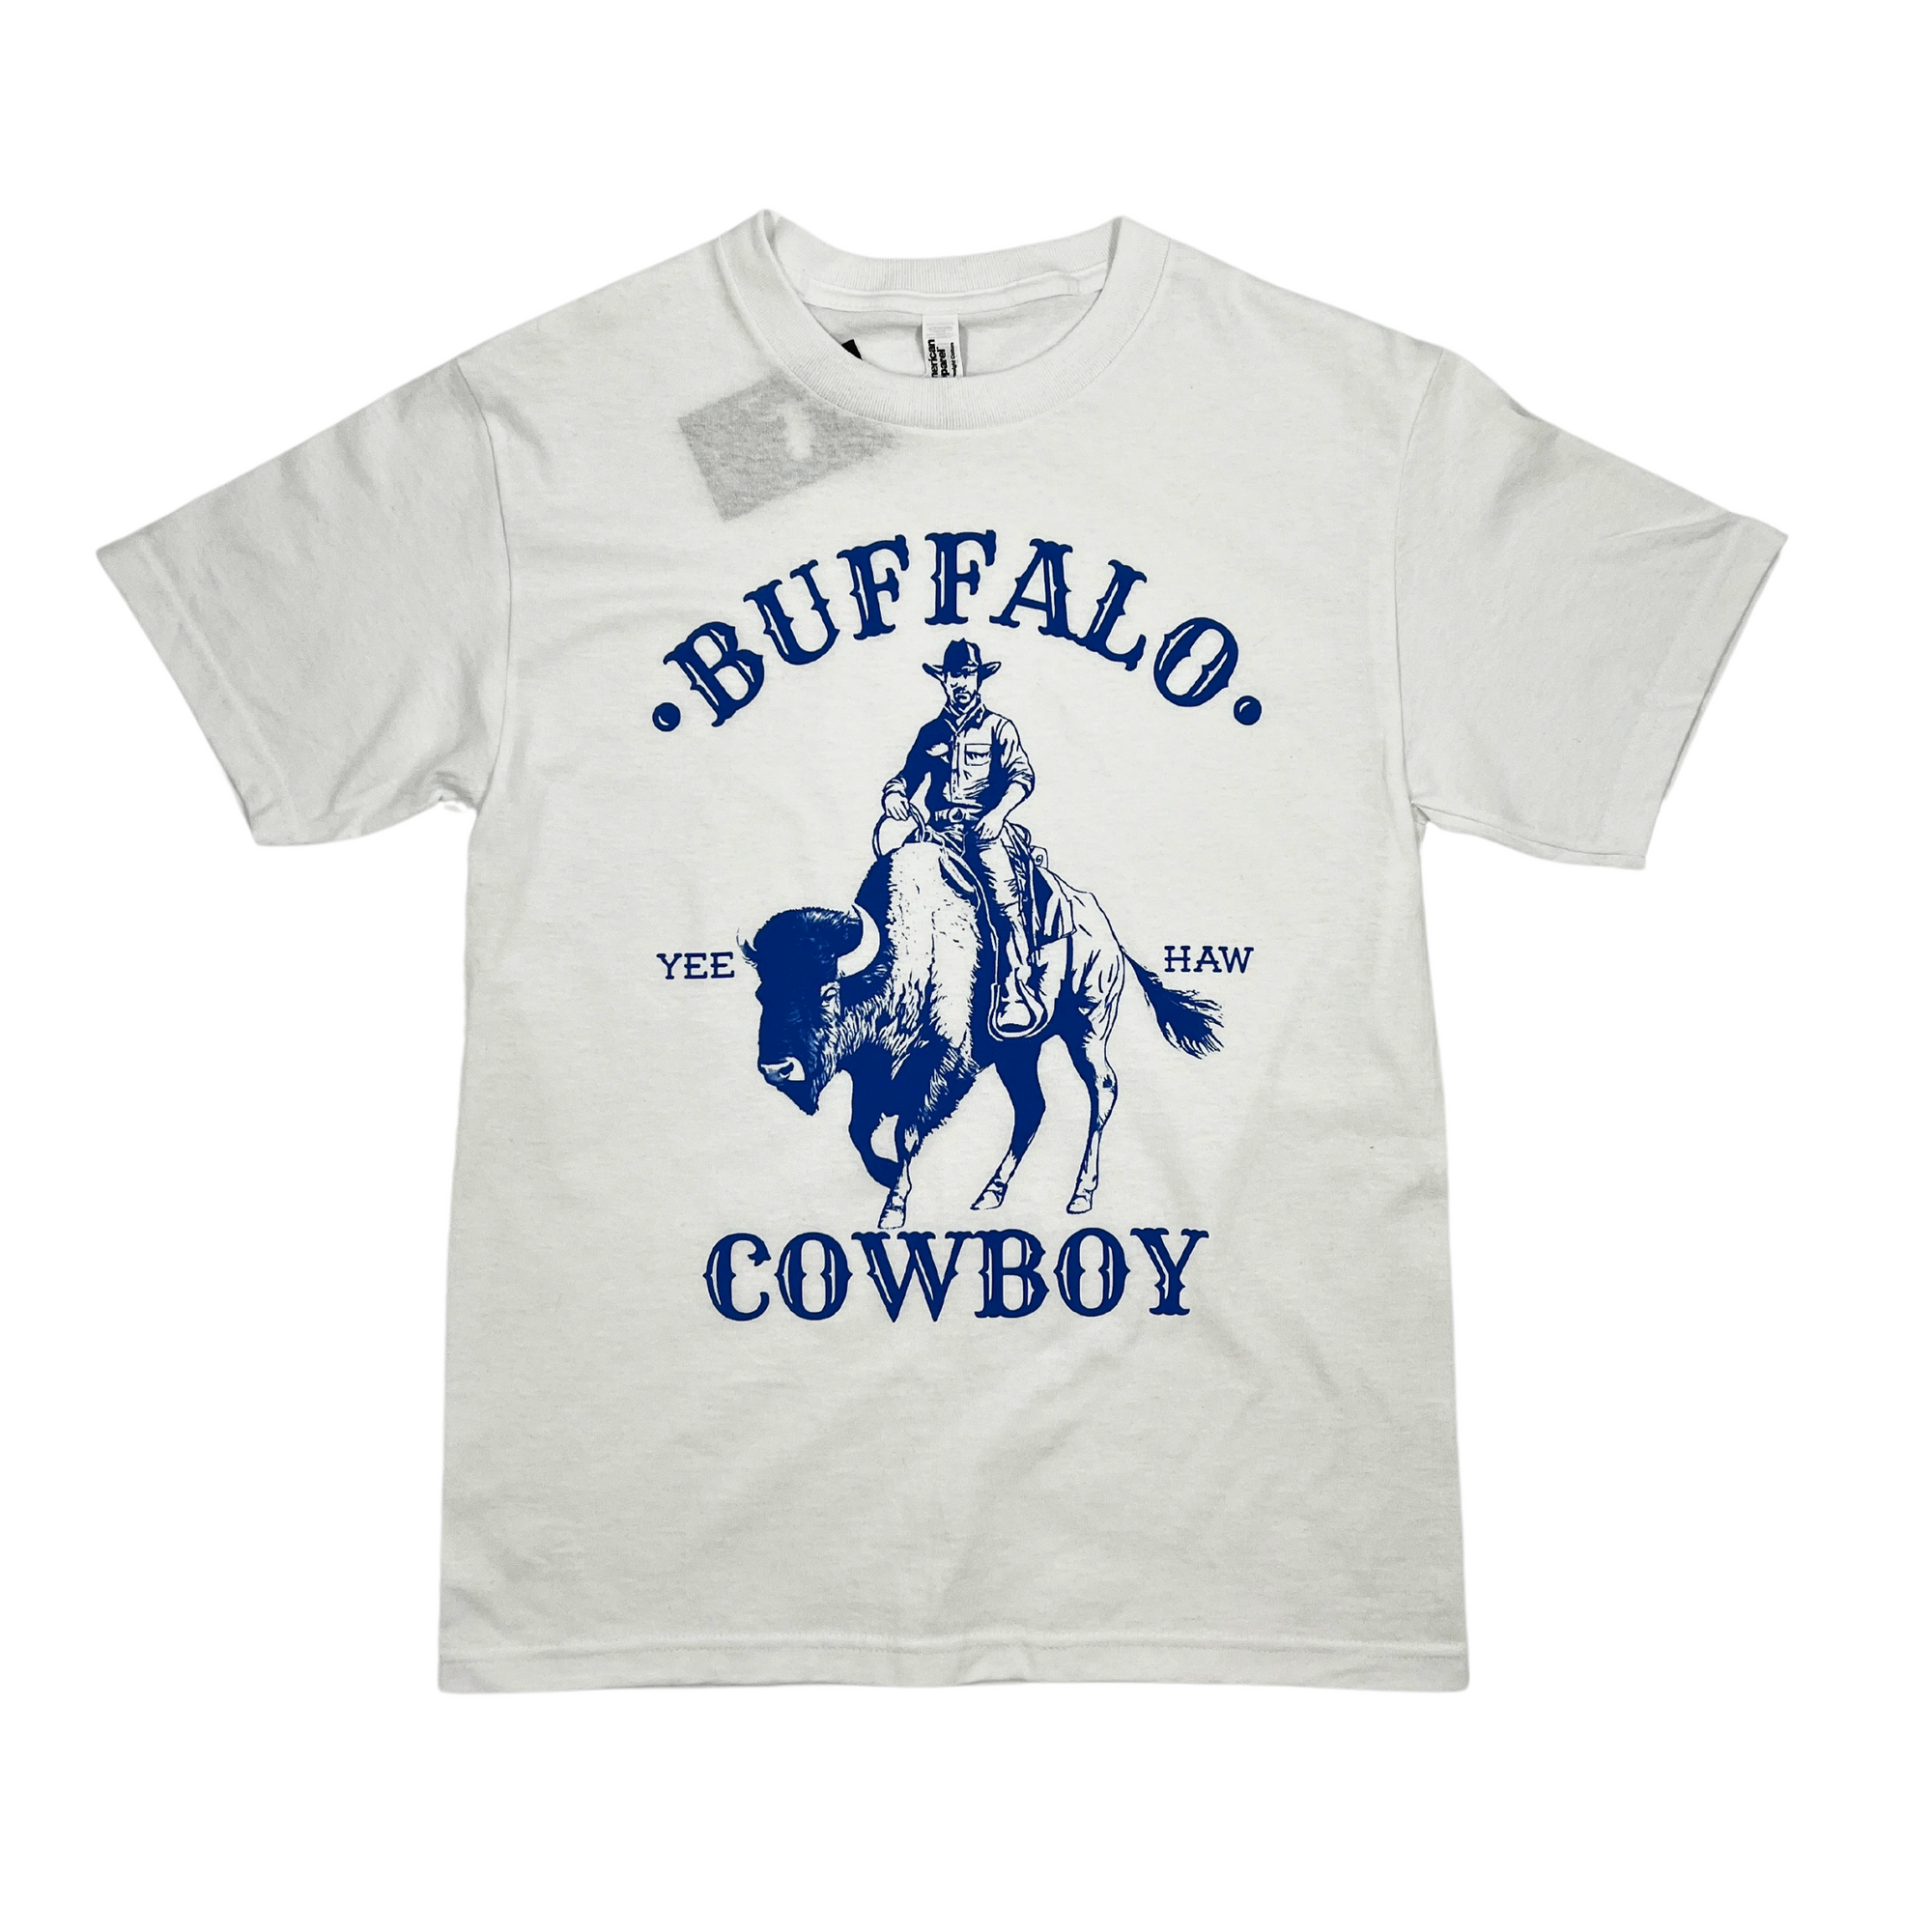 Cowboy riding a bison with the words buffalo cowboy and yee haw short sleeve shirt